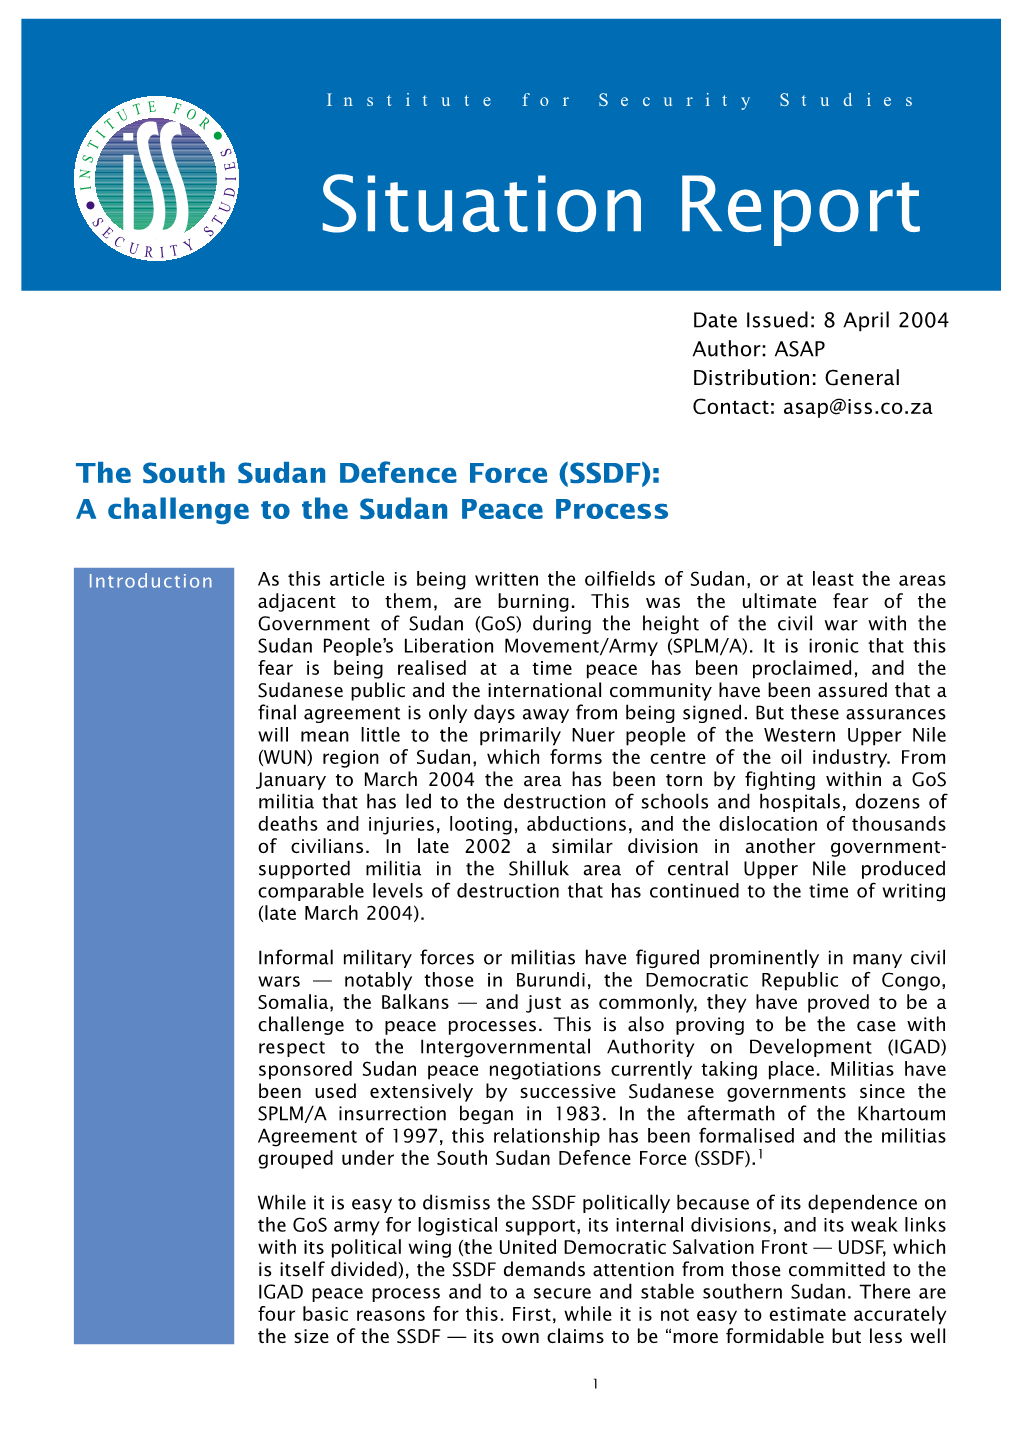 The South Sudan Defence Force (SSDF): a Challenge to the Sudan Peace Process